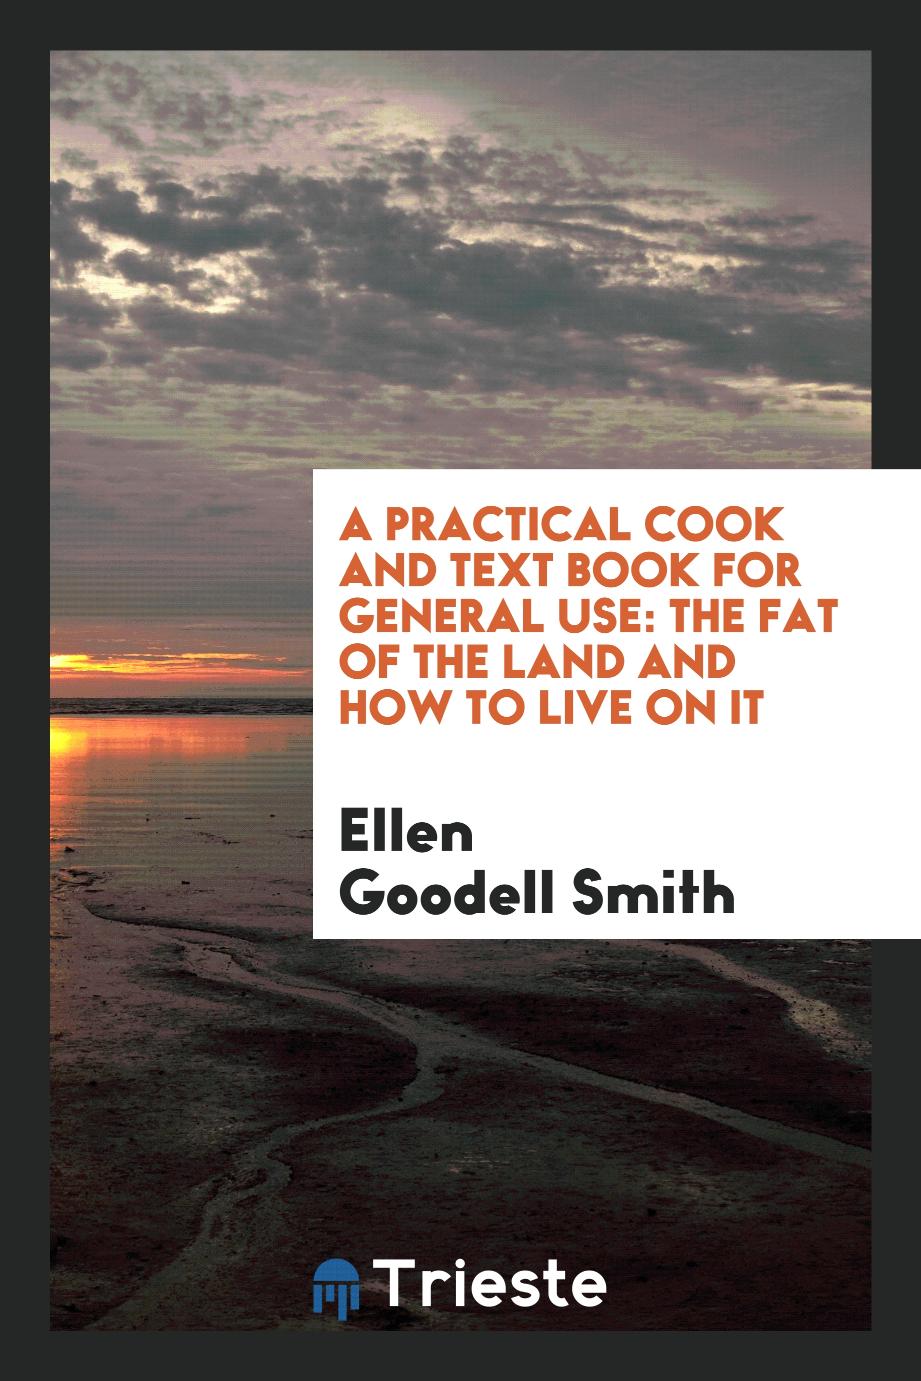 A Practical Cook and Text Book for General Use: The Fat of the Land and How to Live on It